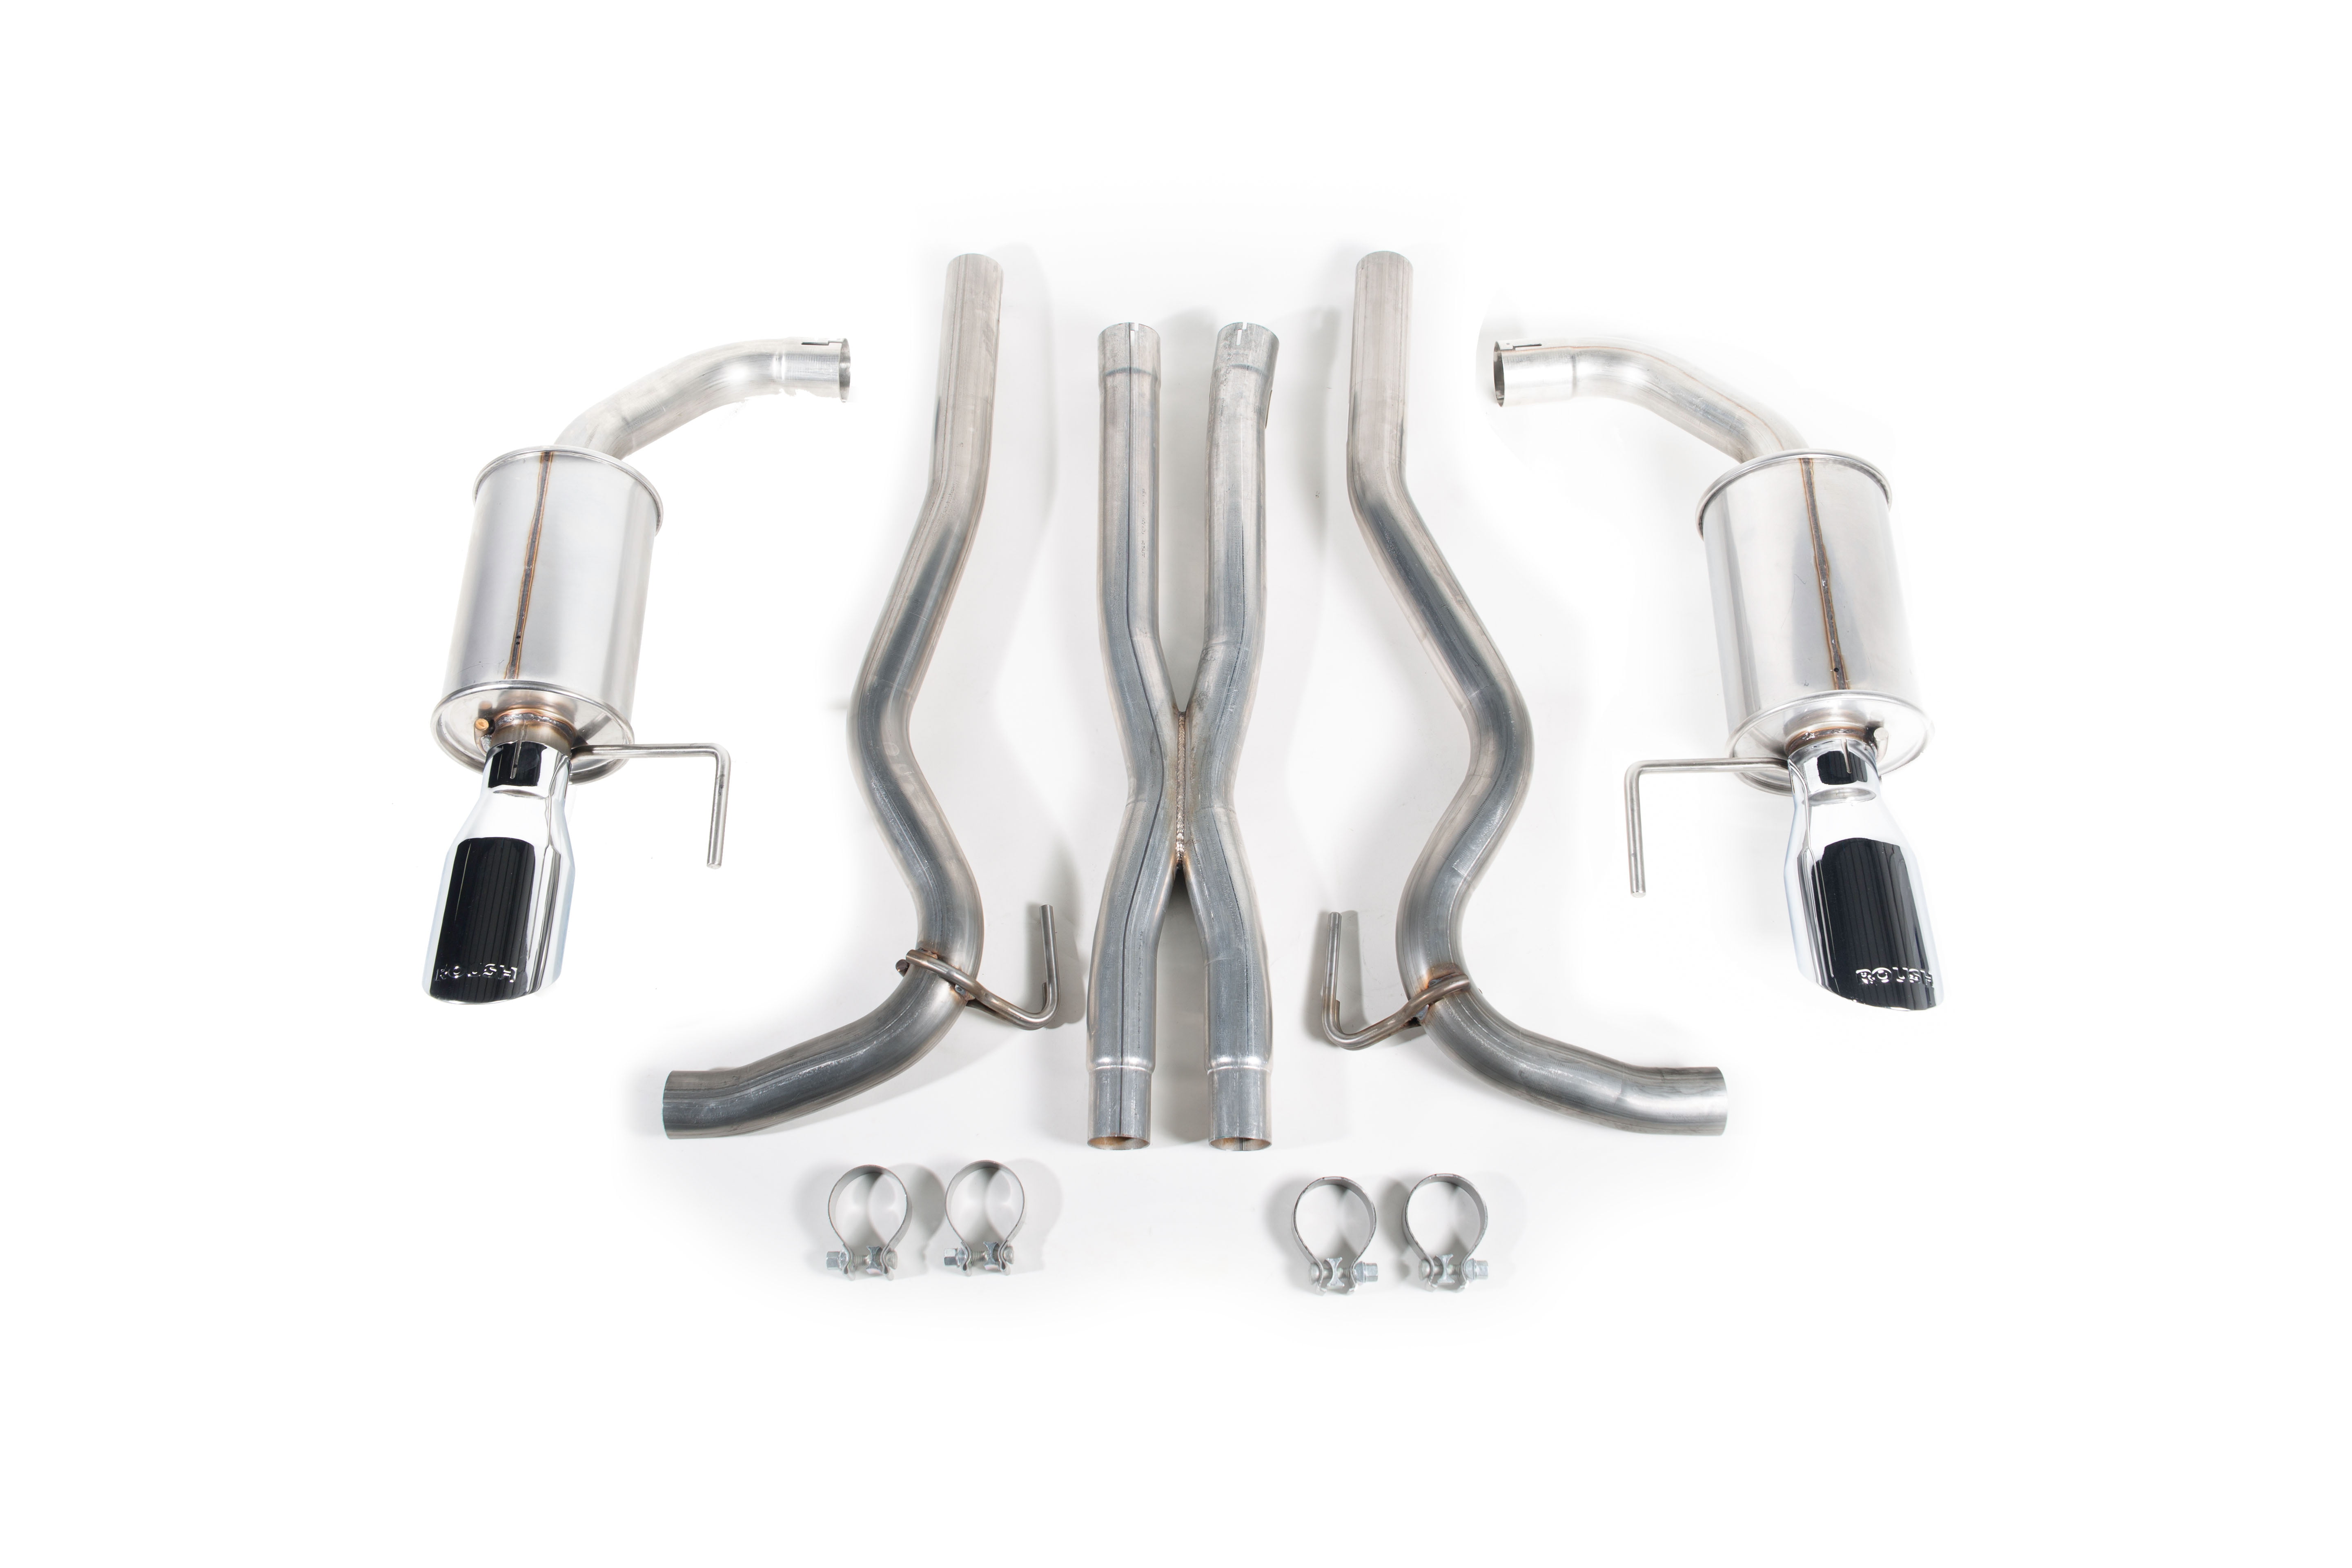 Roush 422092 Cat Back Exhaust System with X-Pipe for 2015-2017 Mustang GT 5.0L